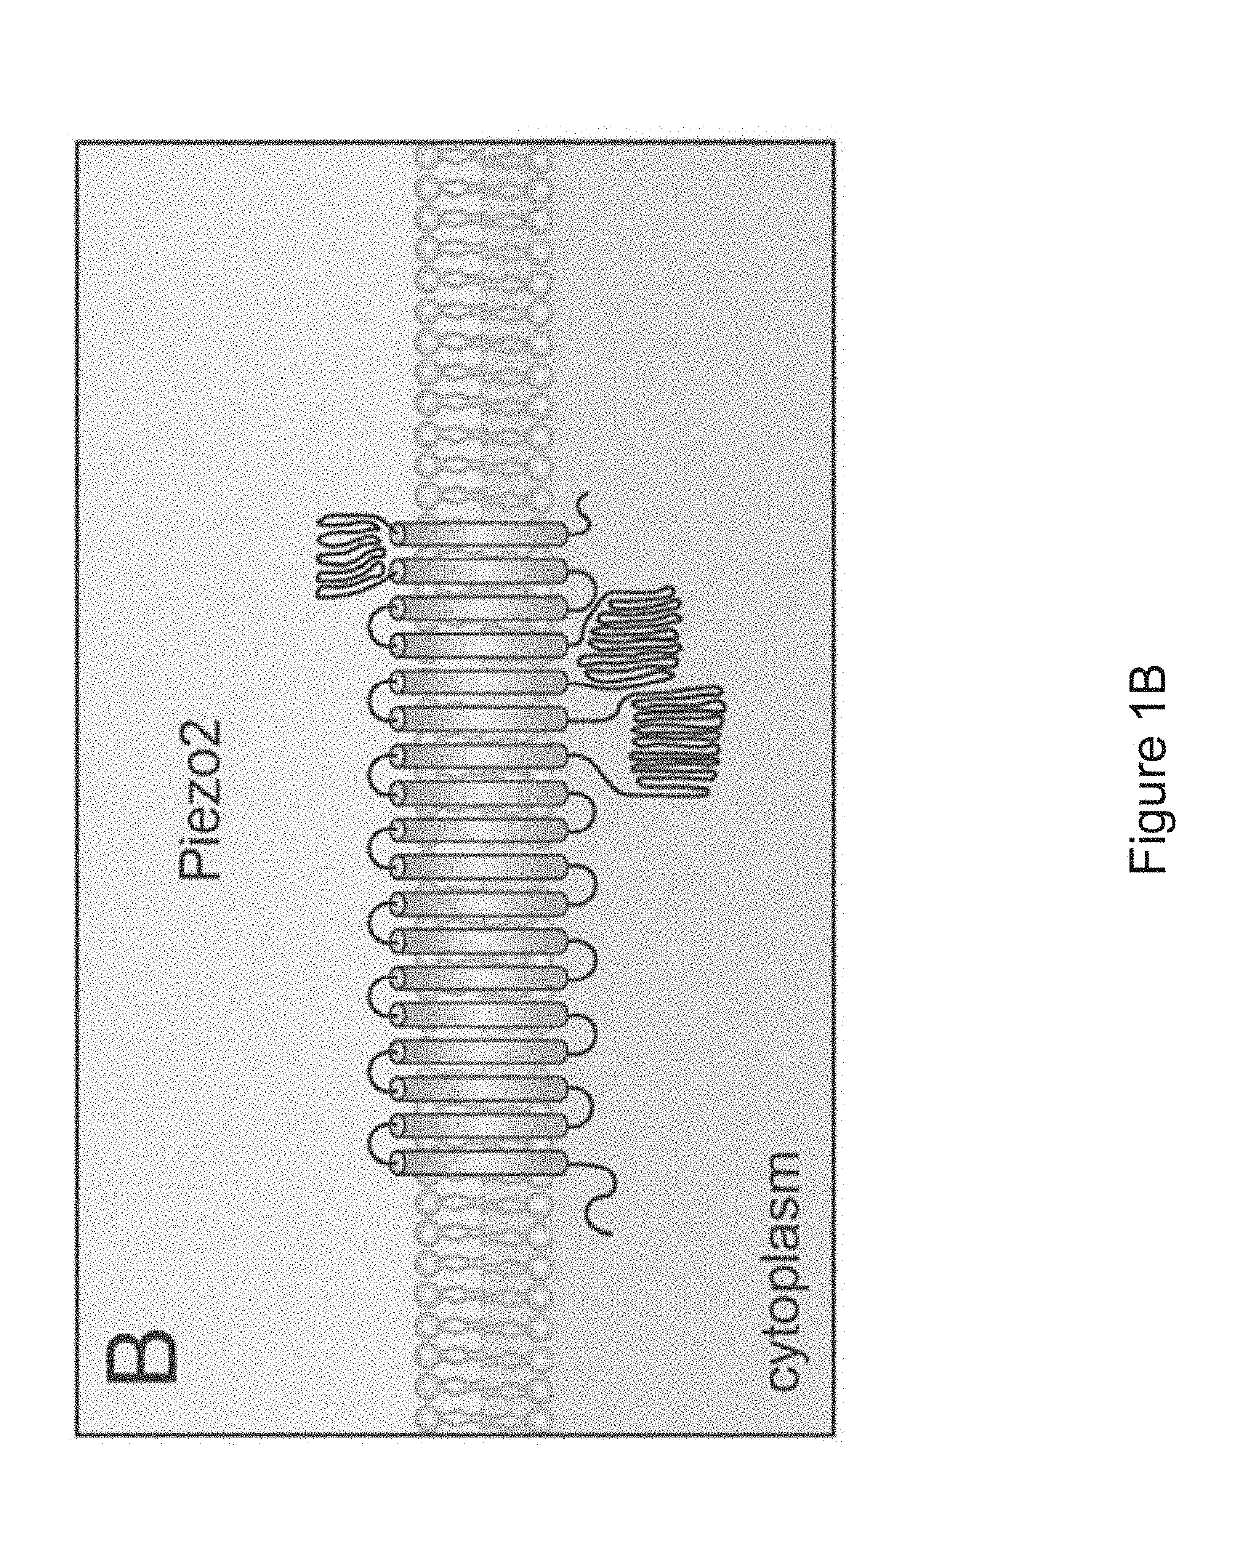 Devices and methods for delivering mechanical stimulation to nerve, mechanoreceptor, and cell targets